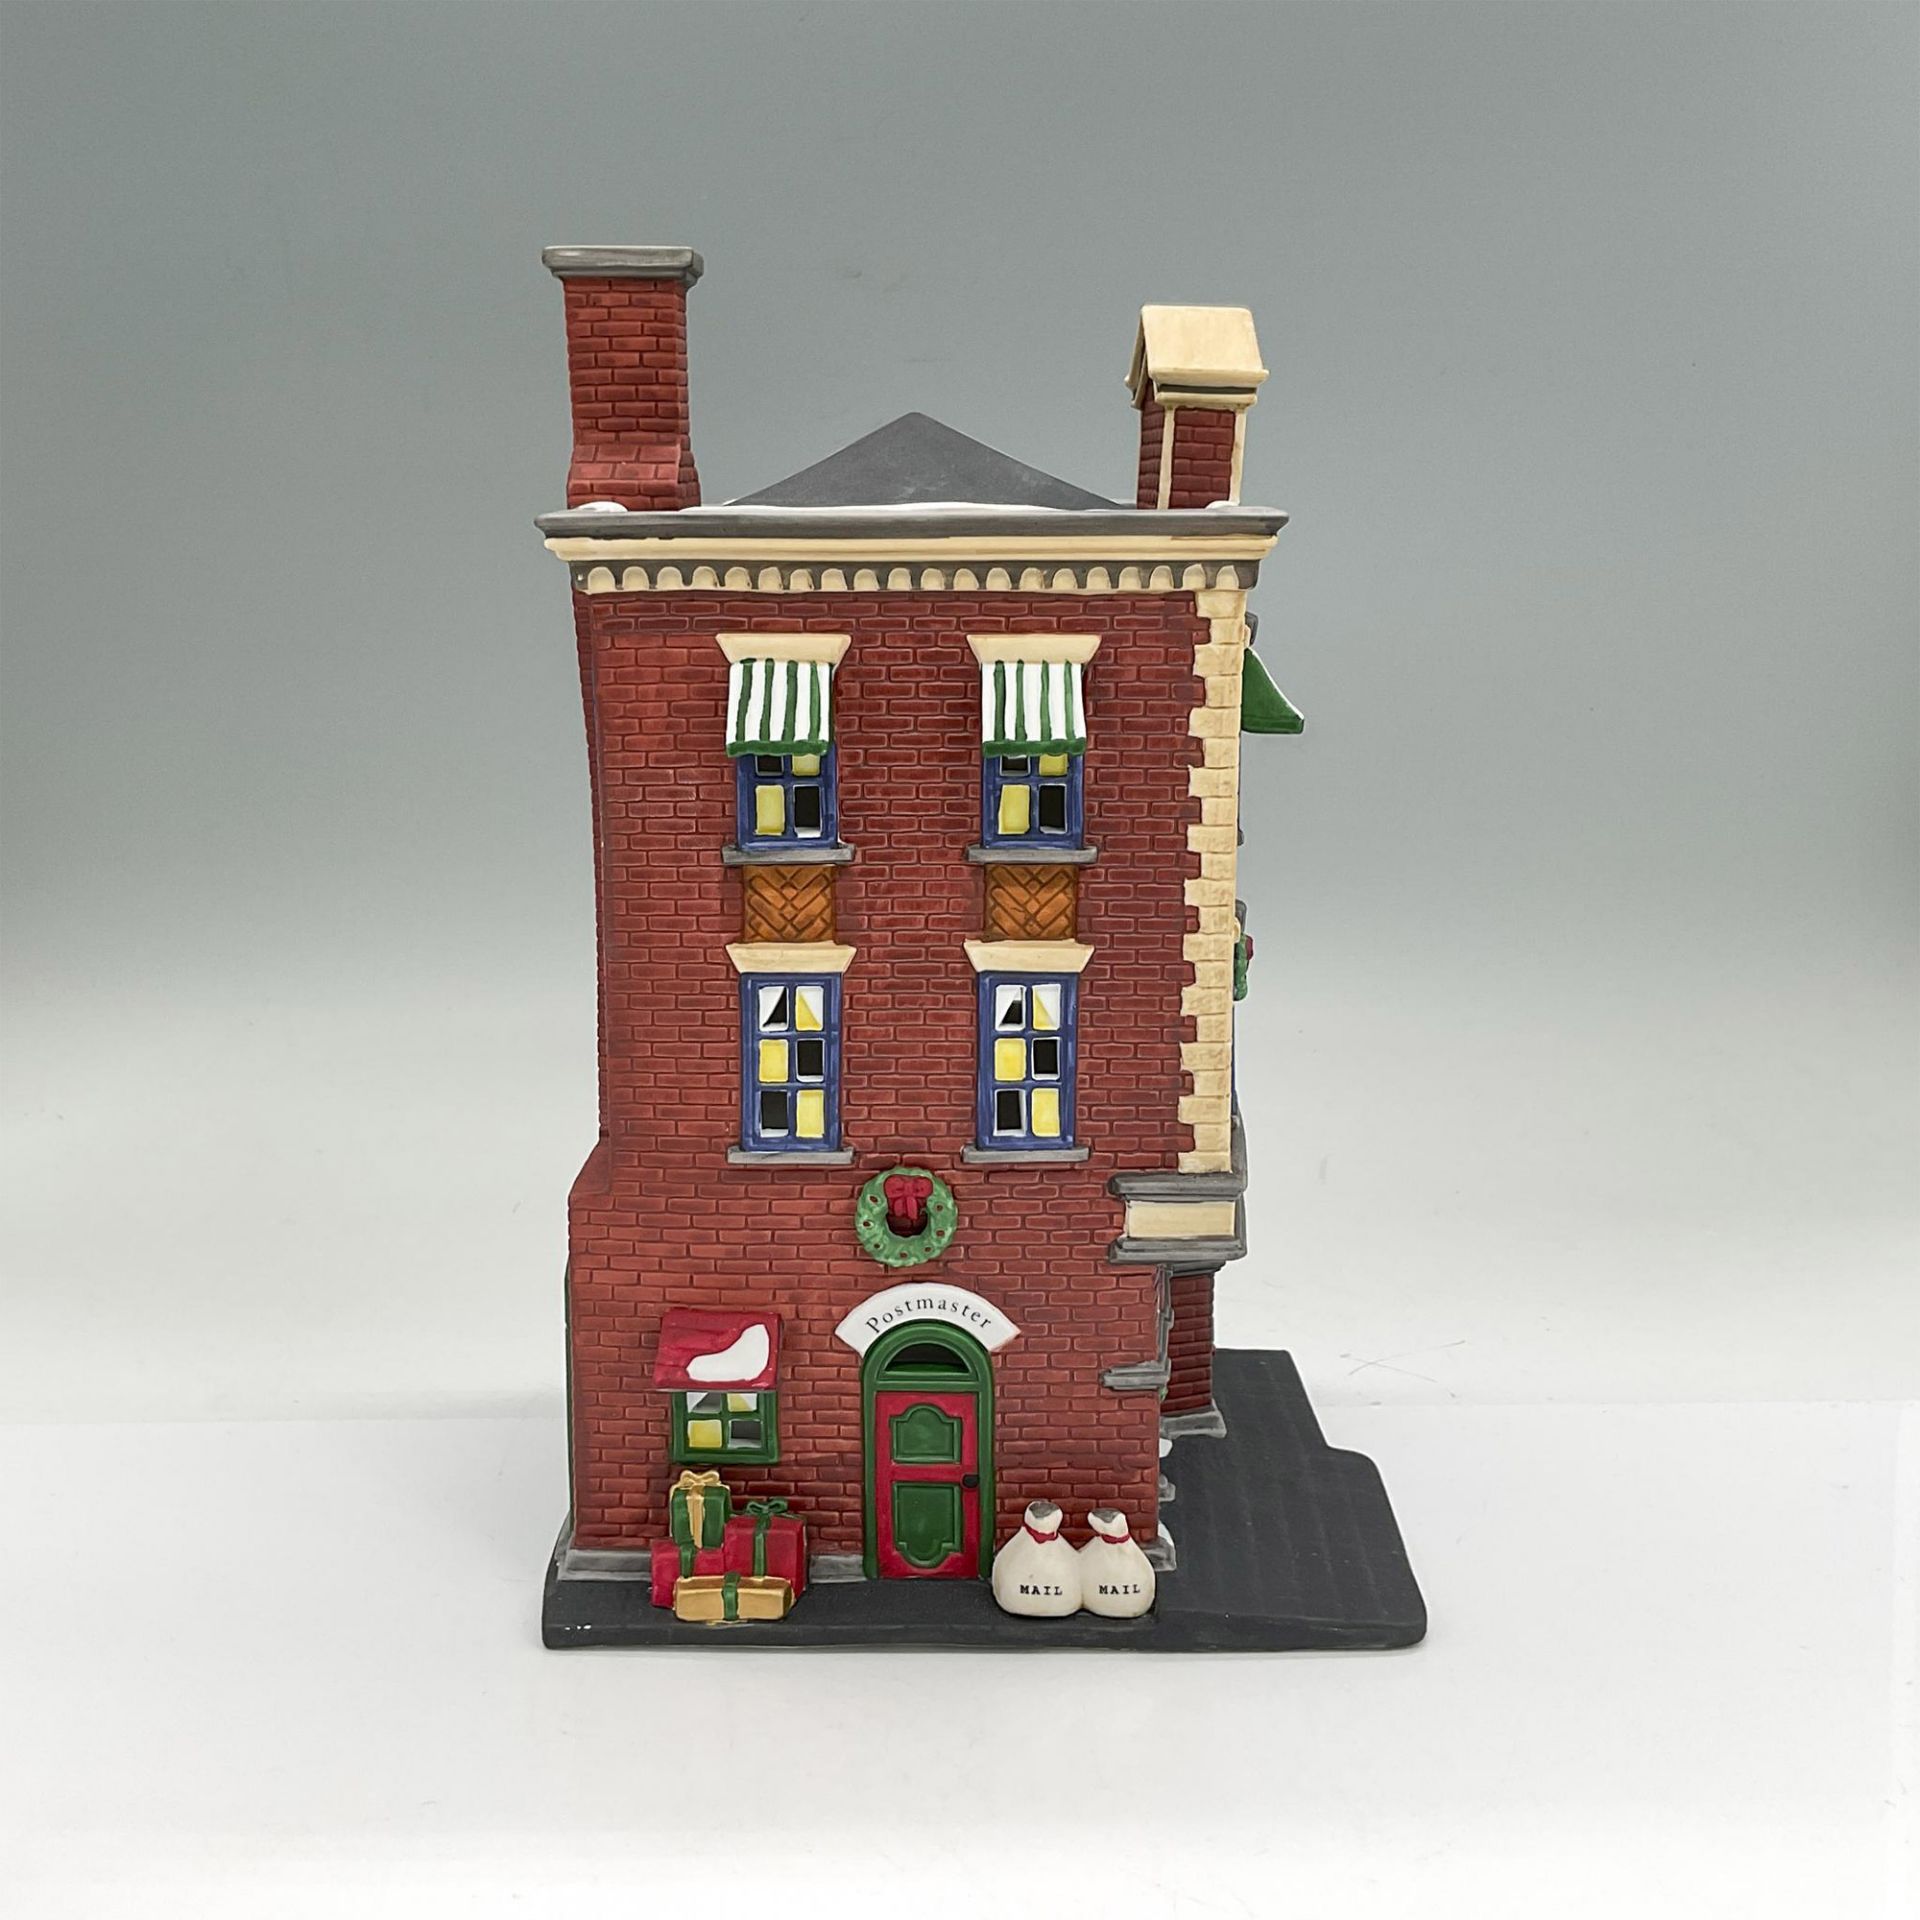 Department 56 Heritage Village Collection Building, Post Office - Image 2 of 6